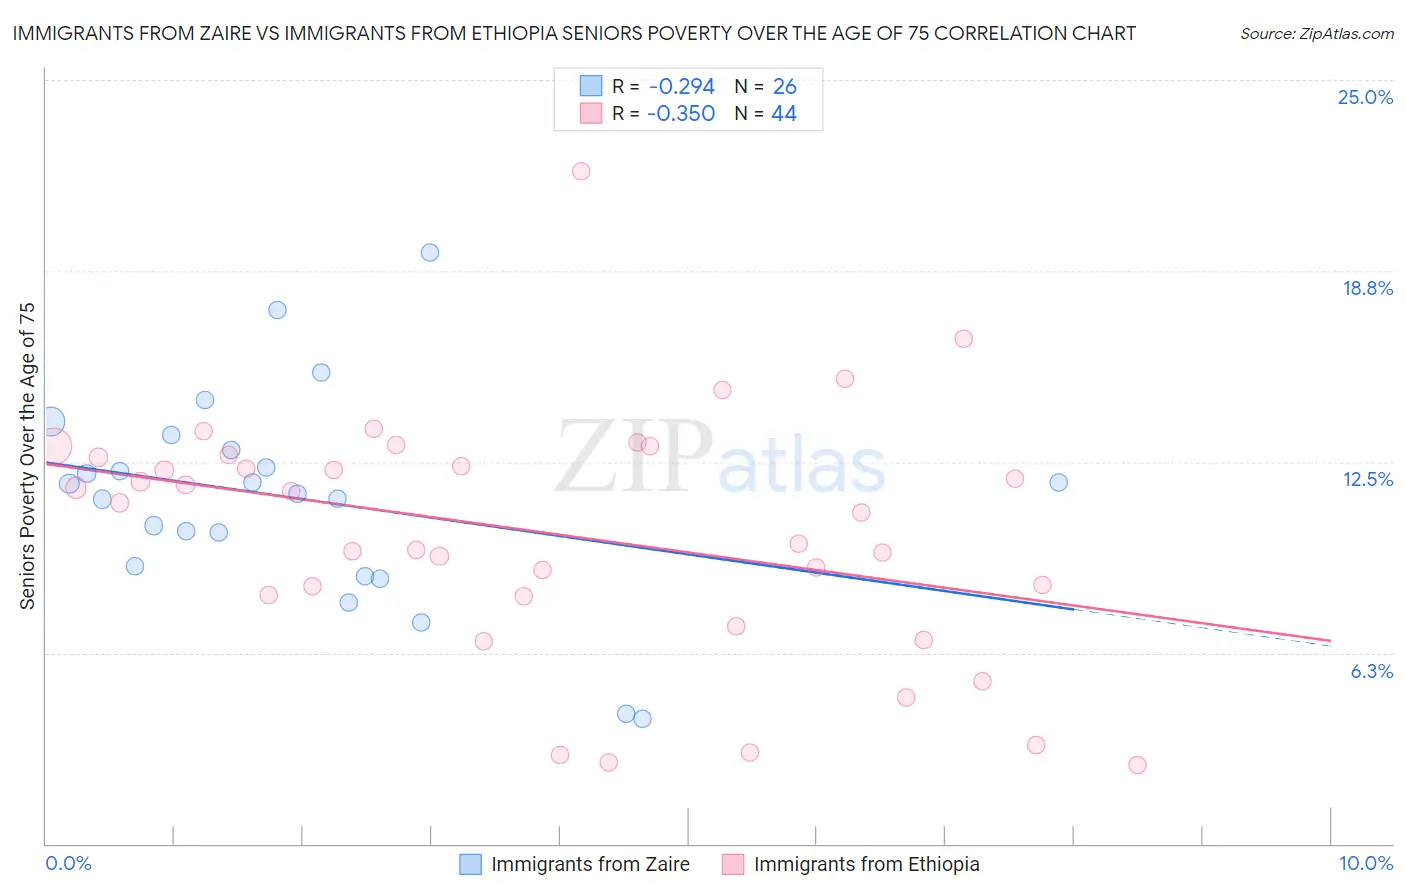 Immigrants from Zaire vs Immigrants from Ethiopia Seniors Poverty Over the Age of 75